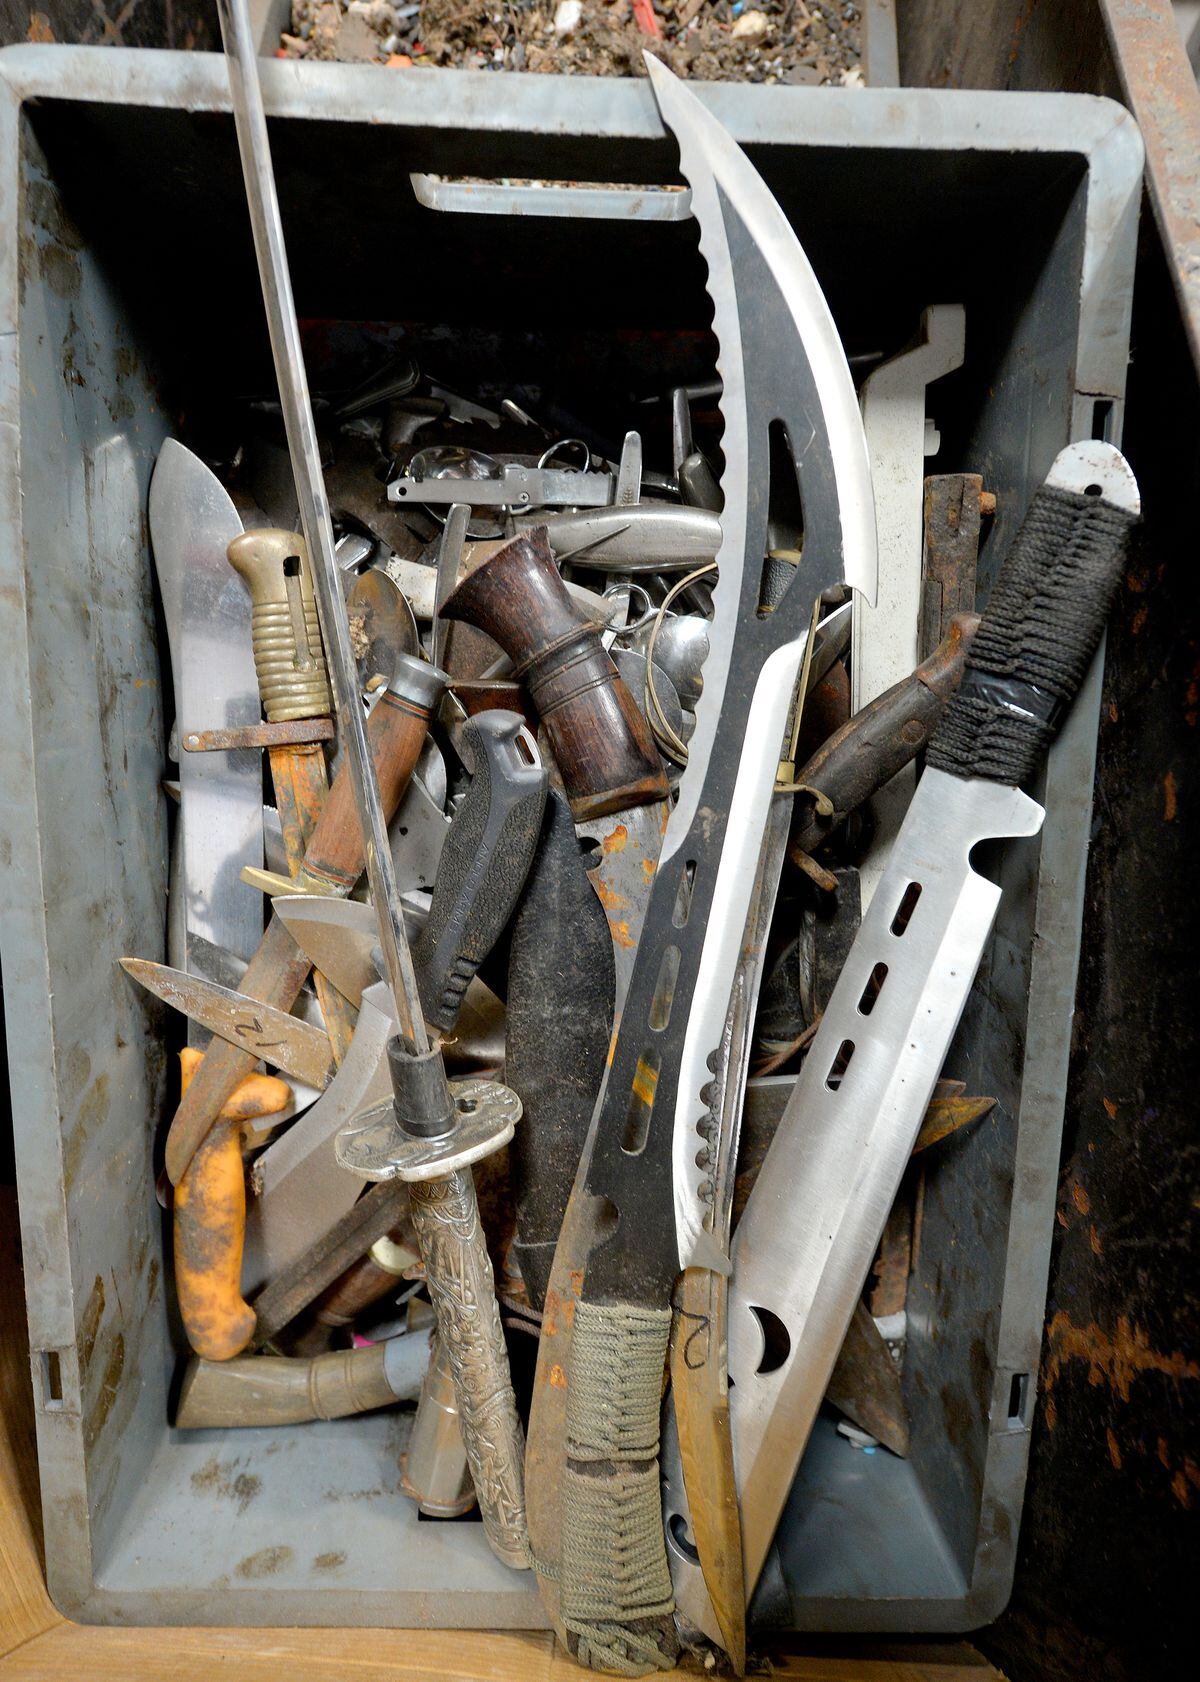 Zombie knives, machetes and flick knives are just some of the weapons being collected and destroyed